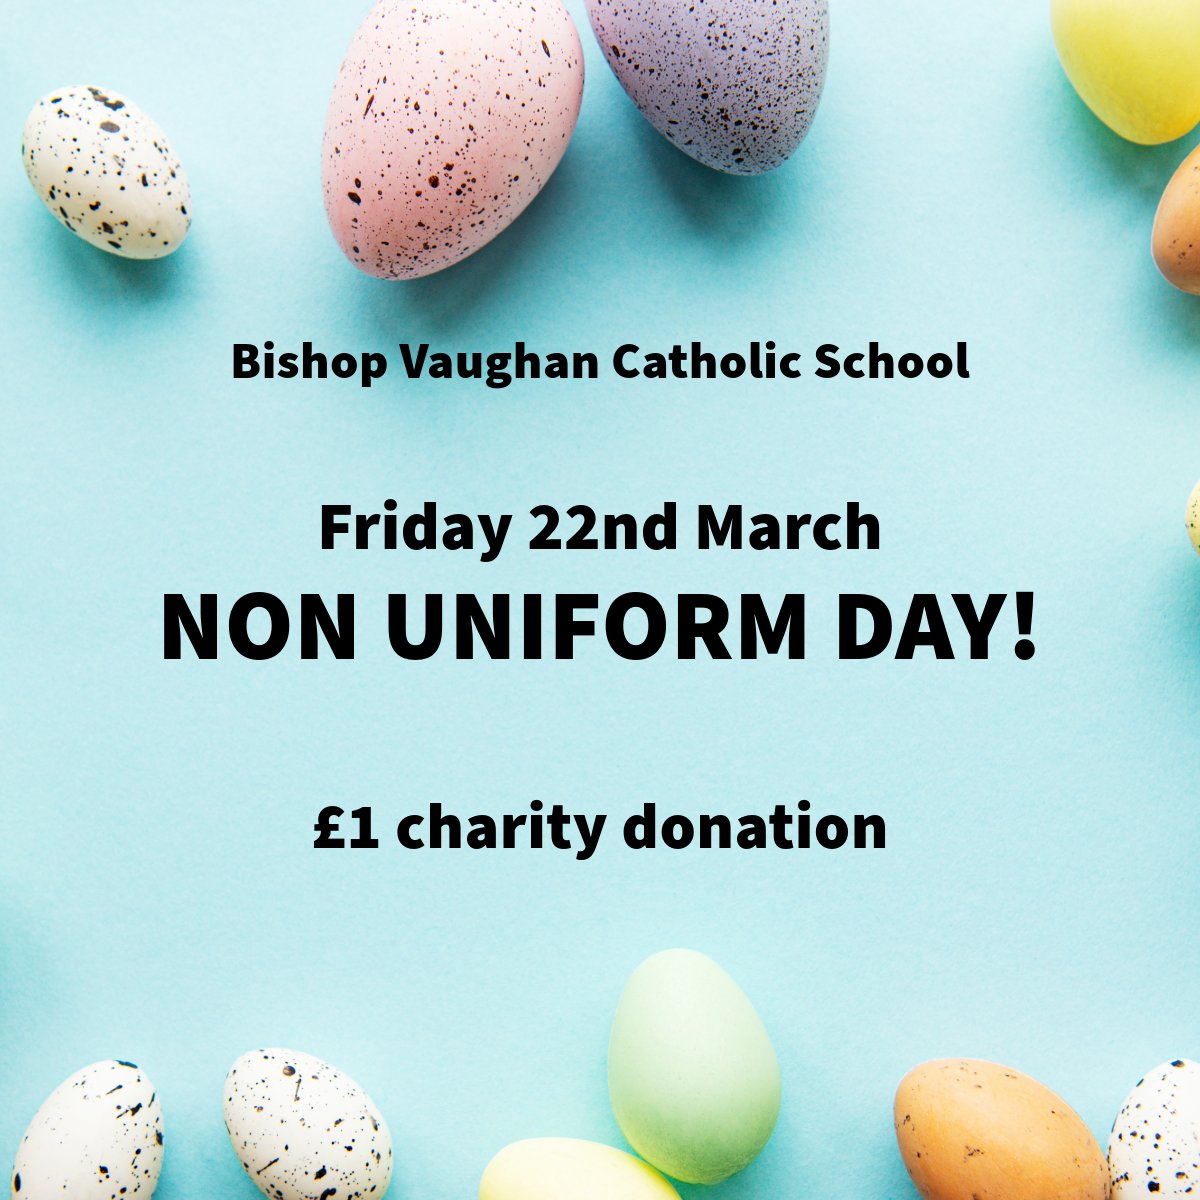 There will be a non-uniform day on Friday 22nd March to raise money for charity. Please can all pupils in non-uniform bring £1 donation for charity. Thank you for your continued support 😀